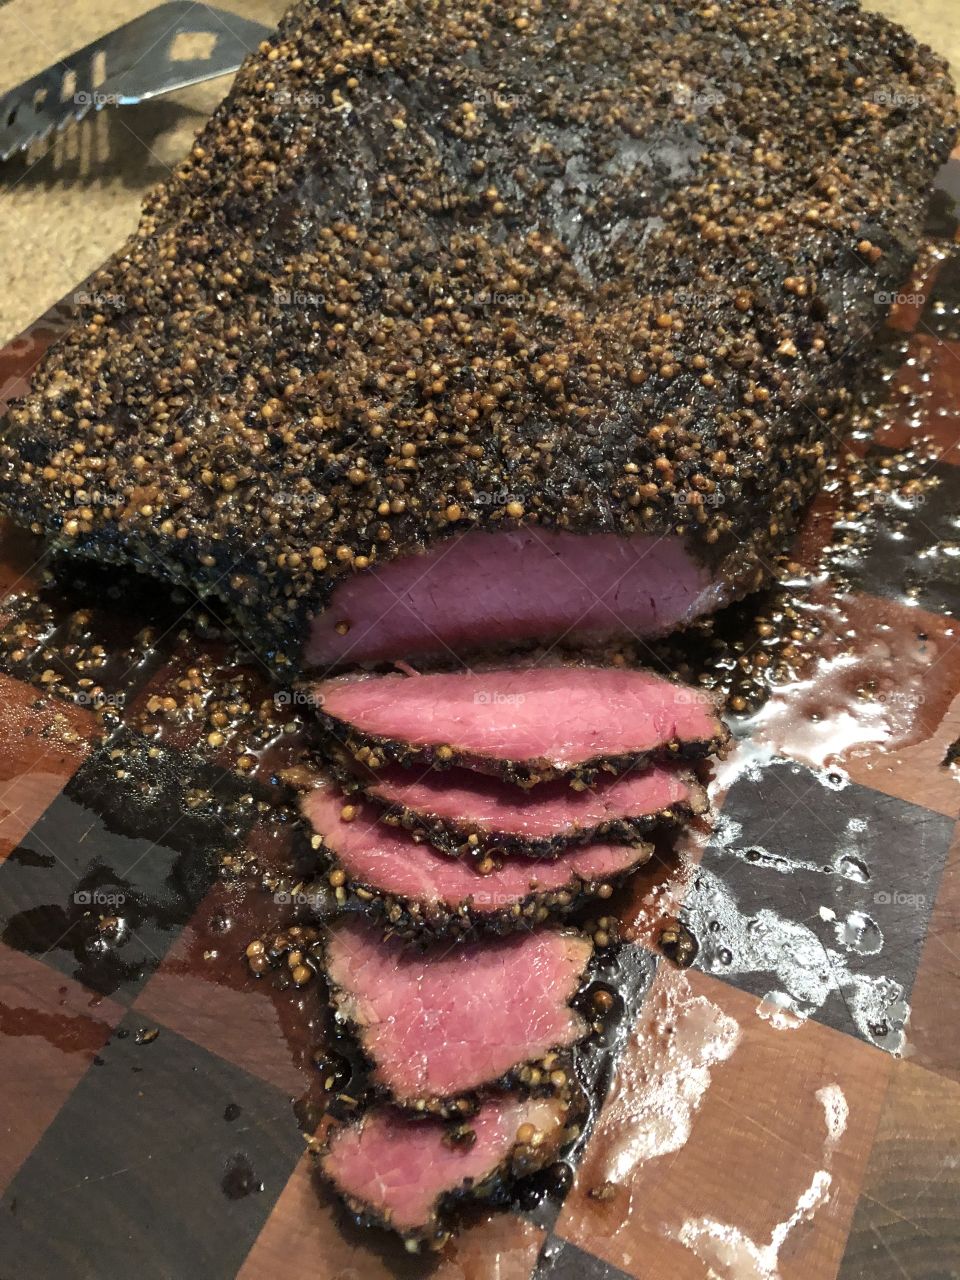 Home made smoked meat